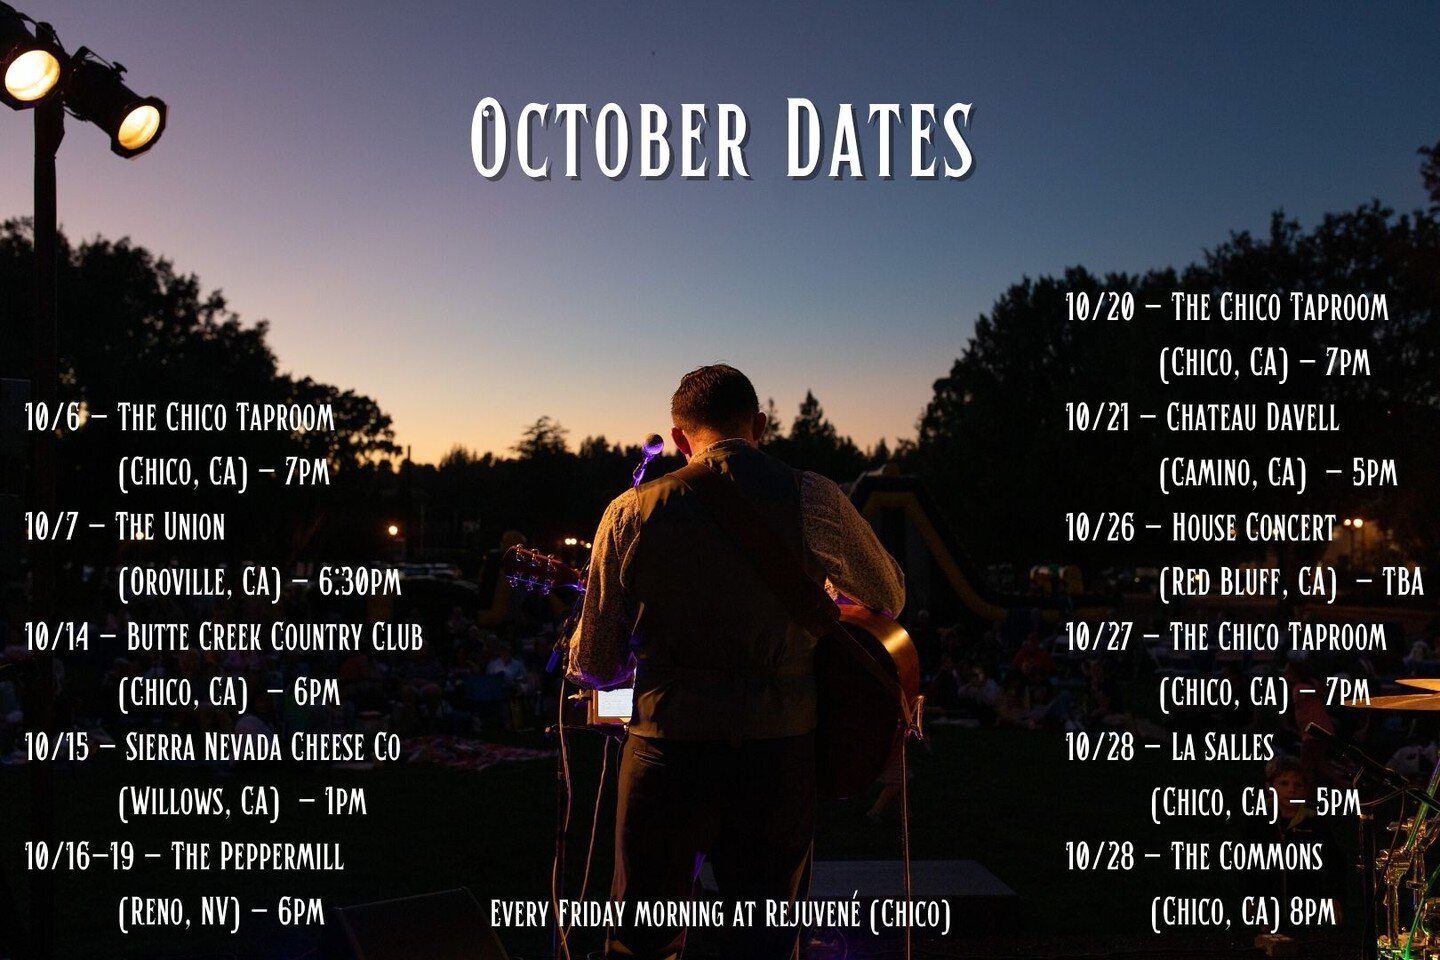 Between a bunch of public performances (listed below) as well as private events and a weekend away (I'm looking at you, Atlanta), it's gonna be a busy month! 

Dates below again for those in the back:
10/6 - @thechicotaproom - 7pm
10/7 - @unionfork -